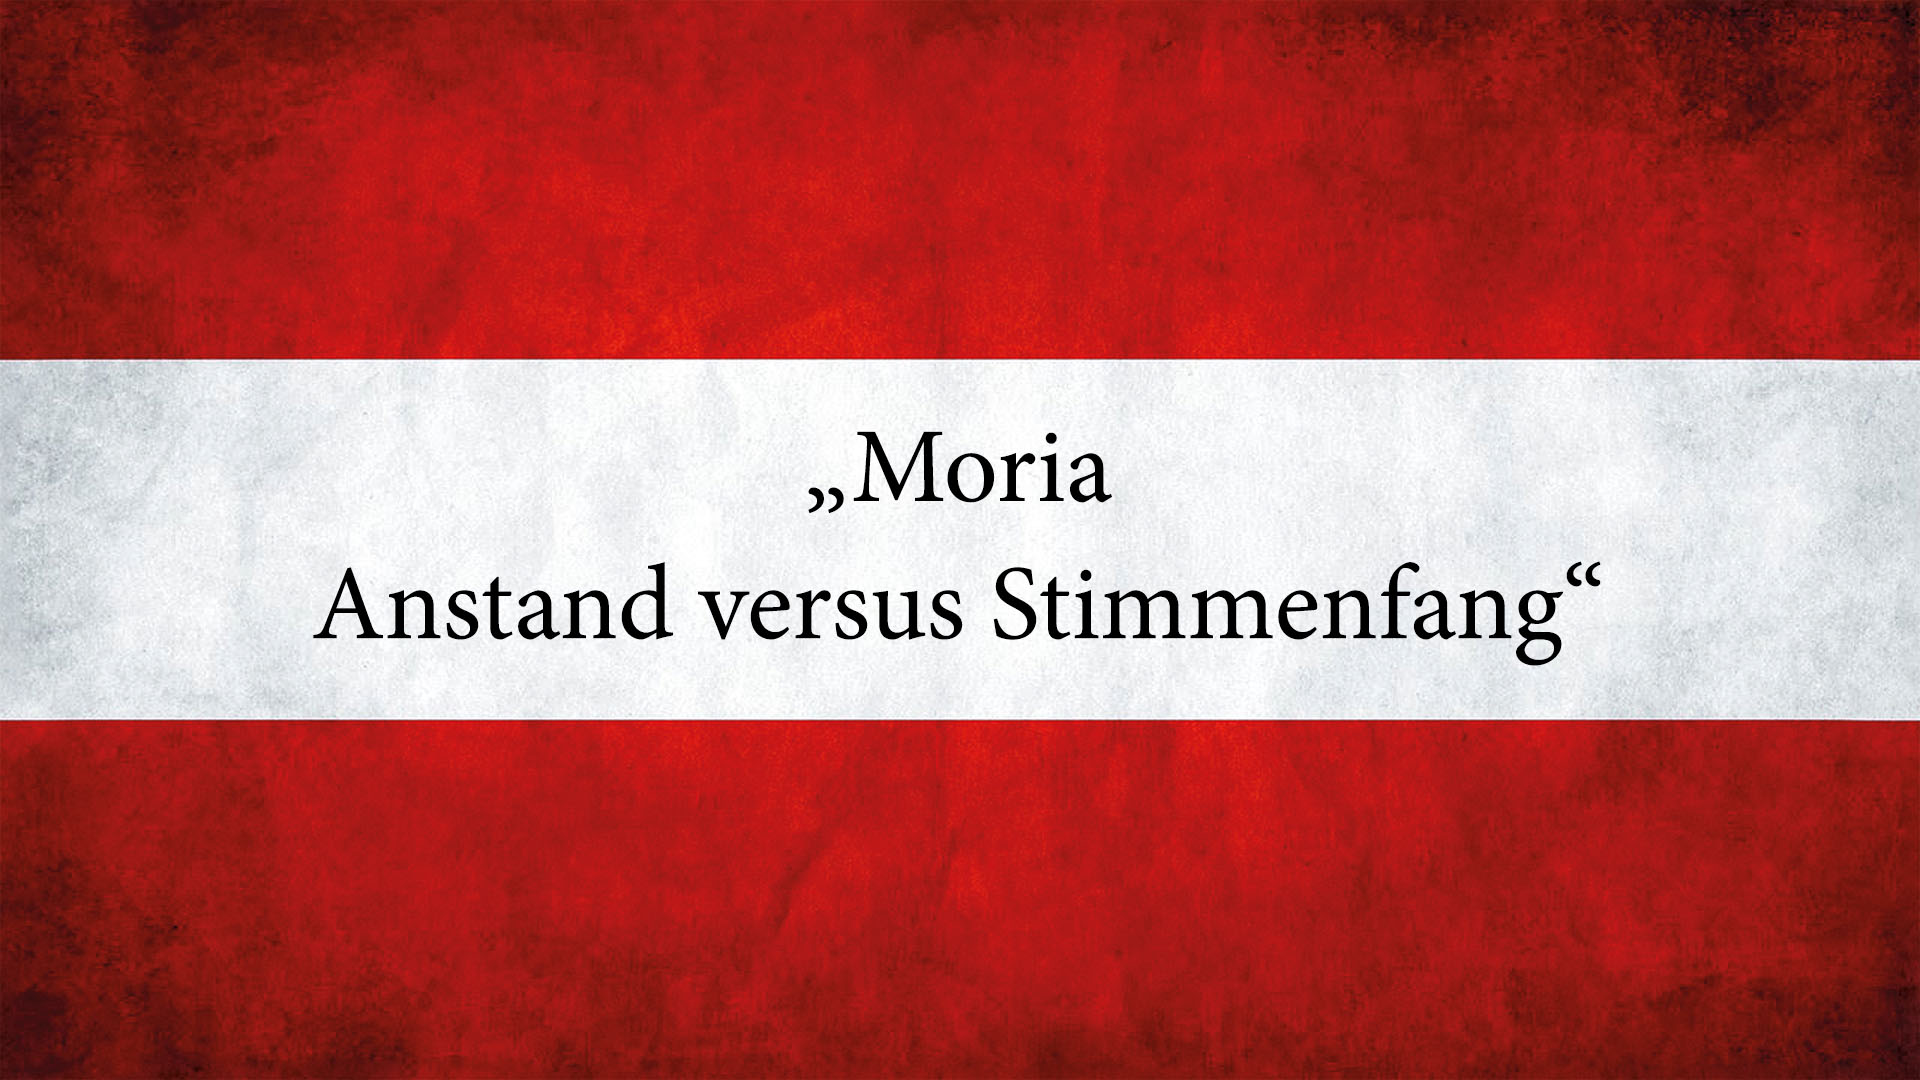 You are currently viewing Moria – Anstand versus Stimmenfang